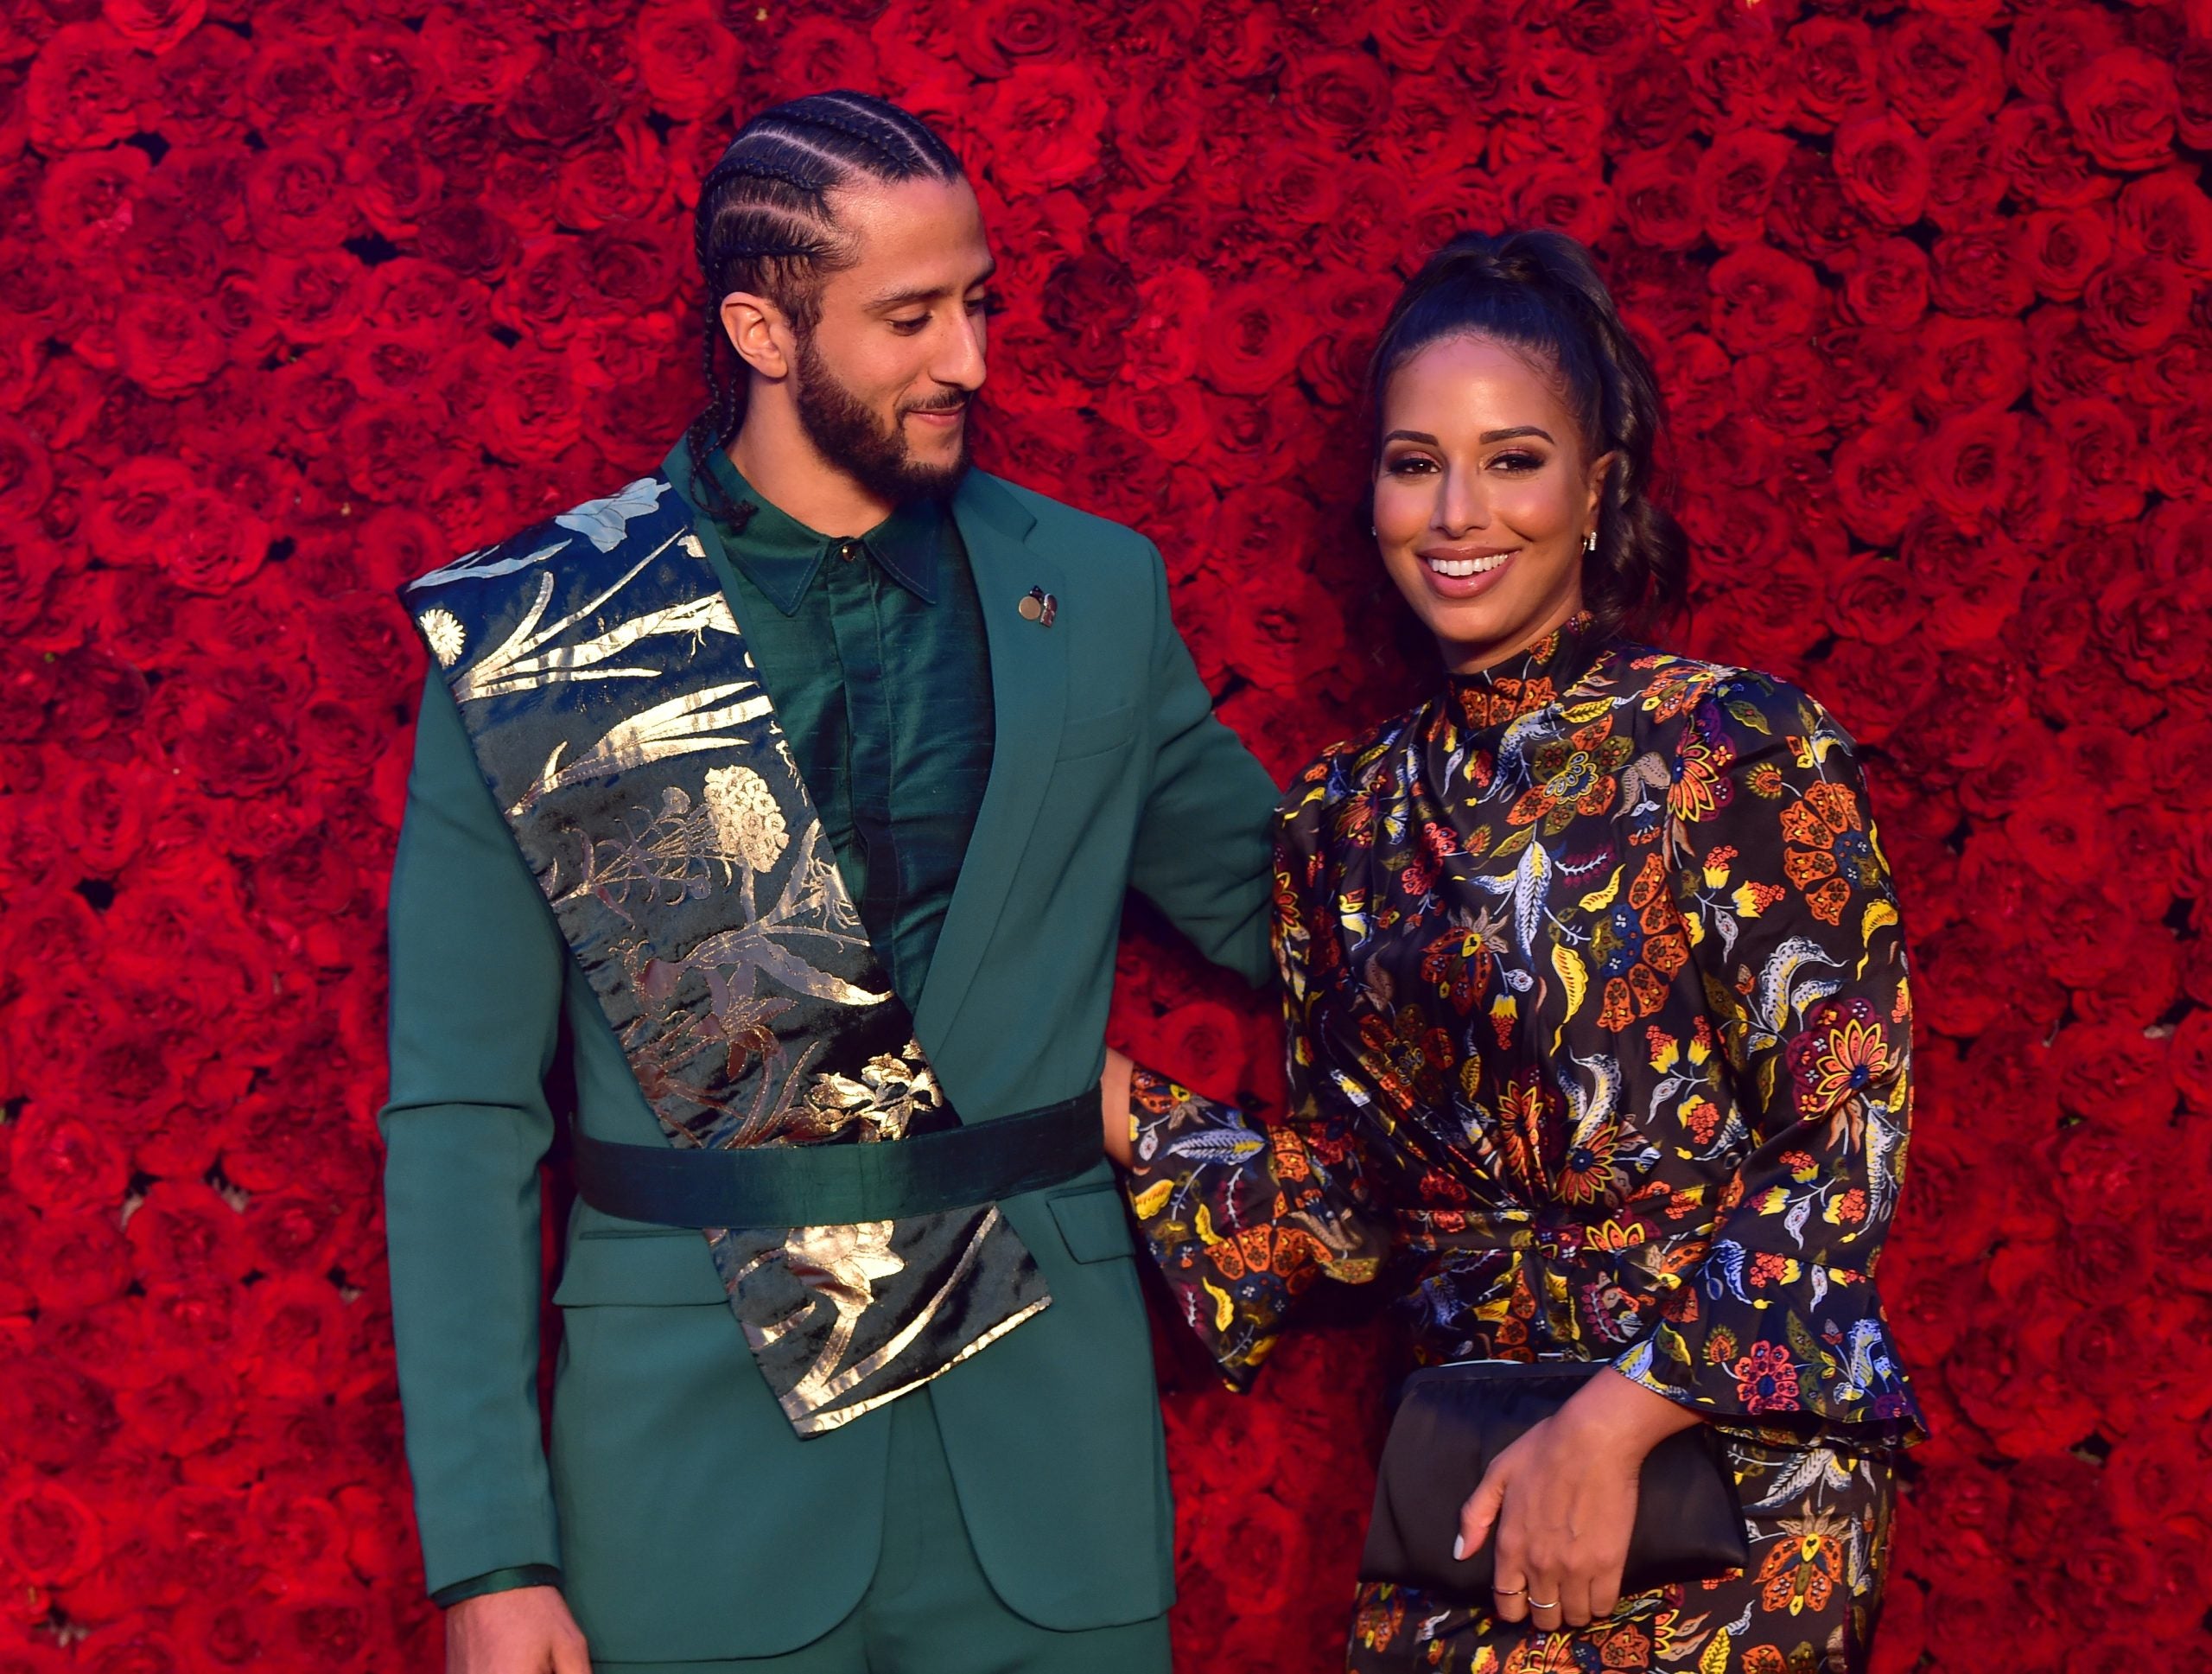 All The Details On Colin Kaepernick And Nessa Diab's Love Story